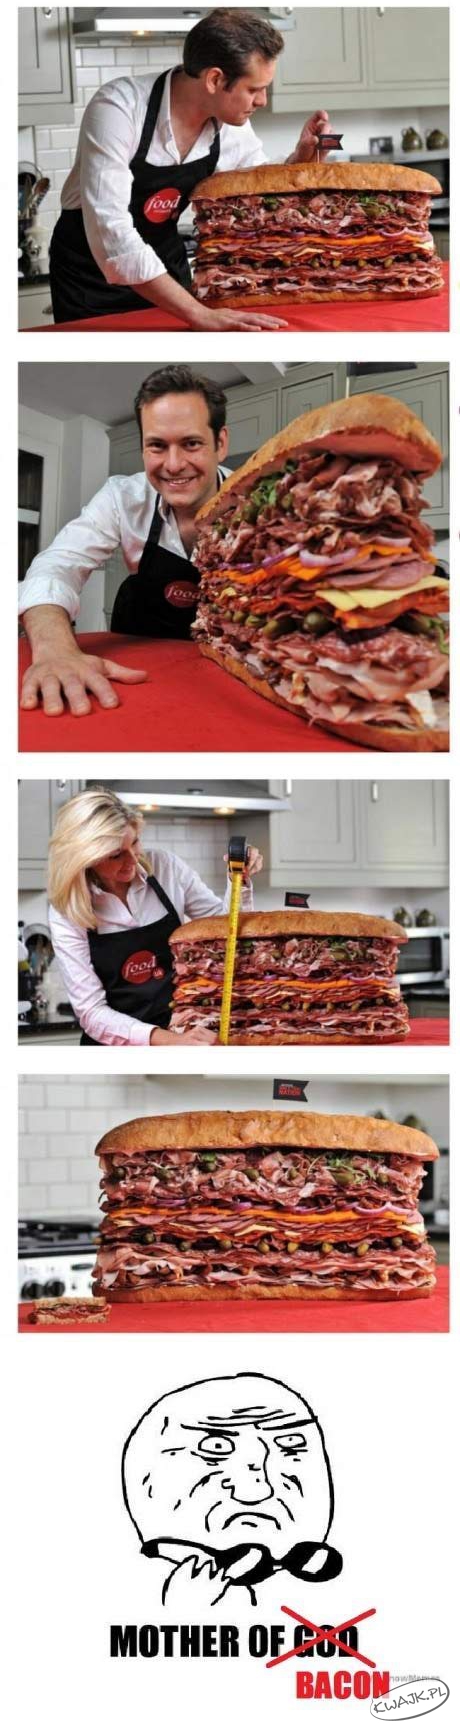 Mother of bacon!